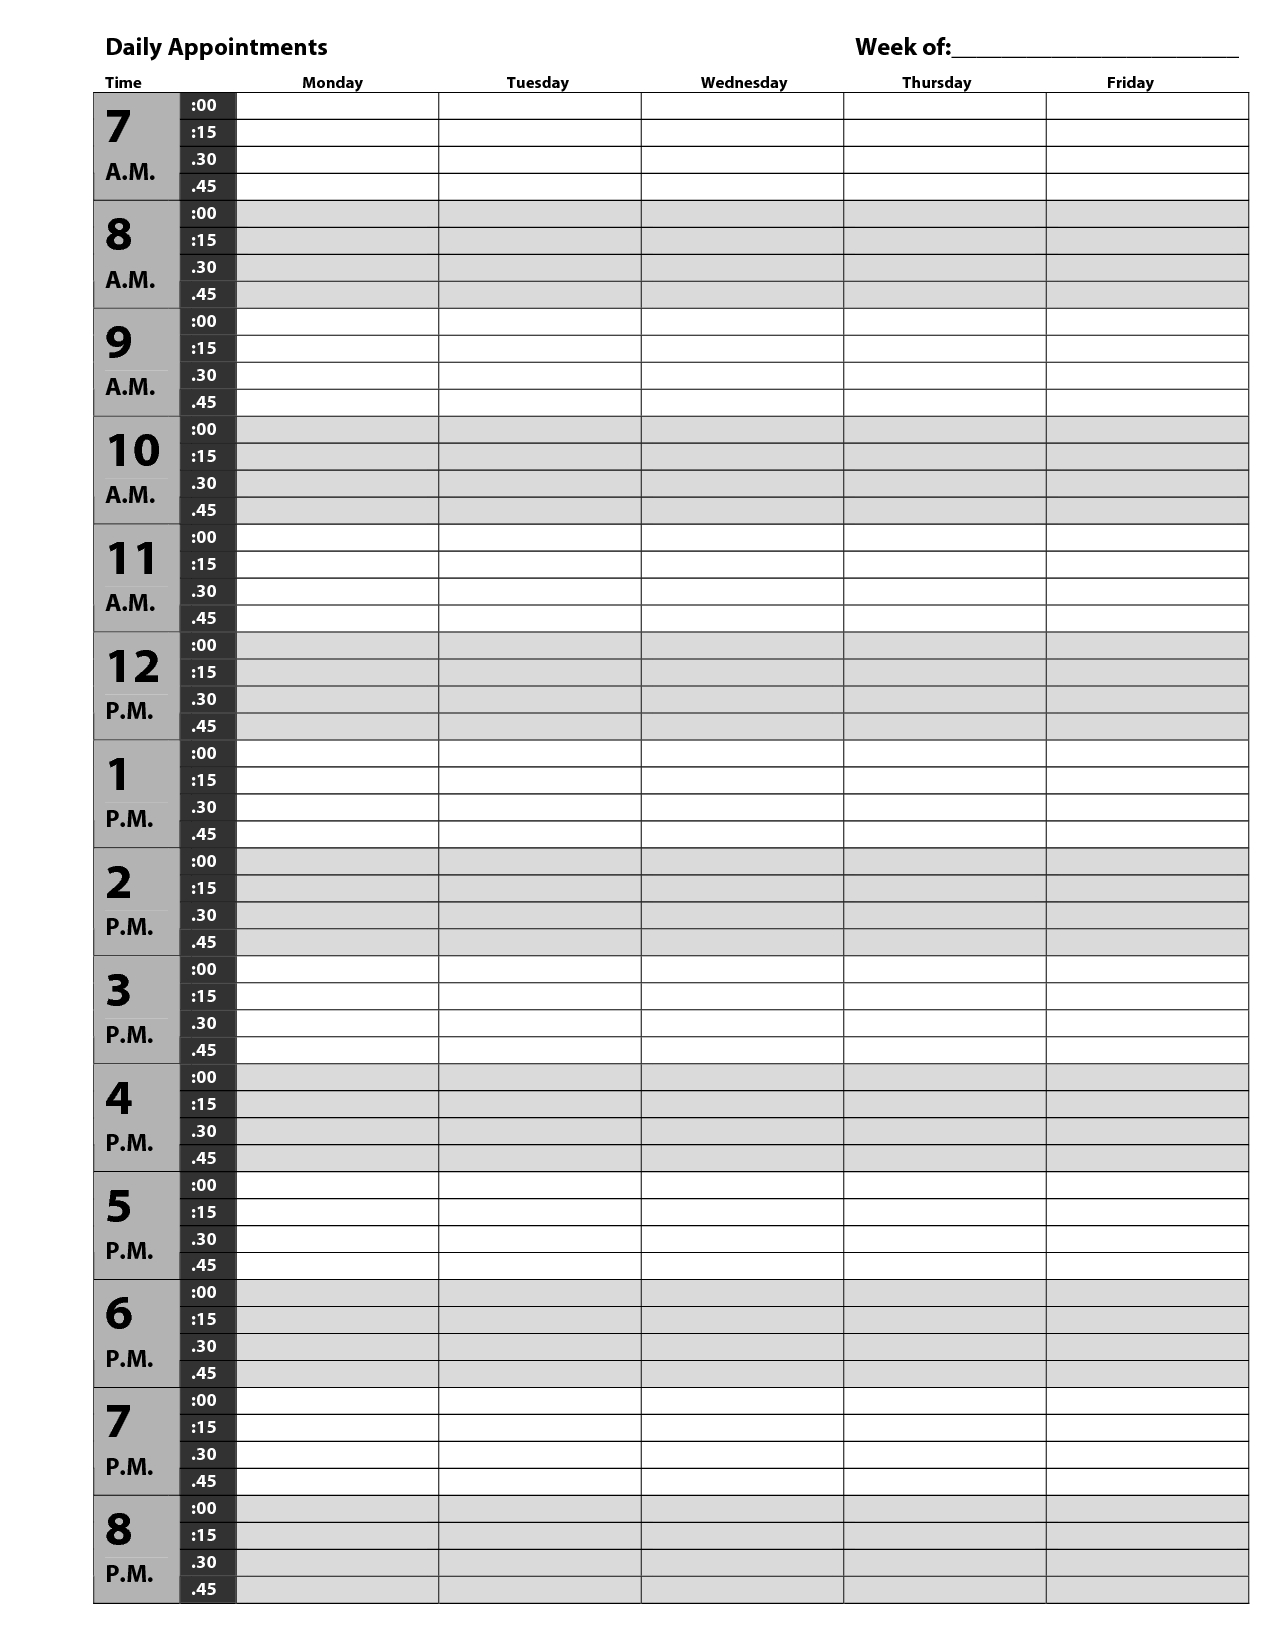 Appointment Book - Pdf | Appointment Calendar, Daily throughout Free Printable 15 Minute Planner